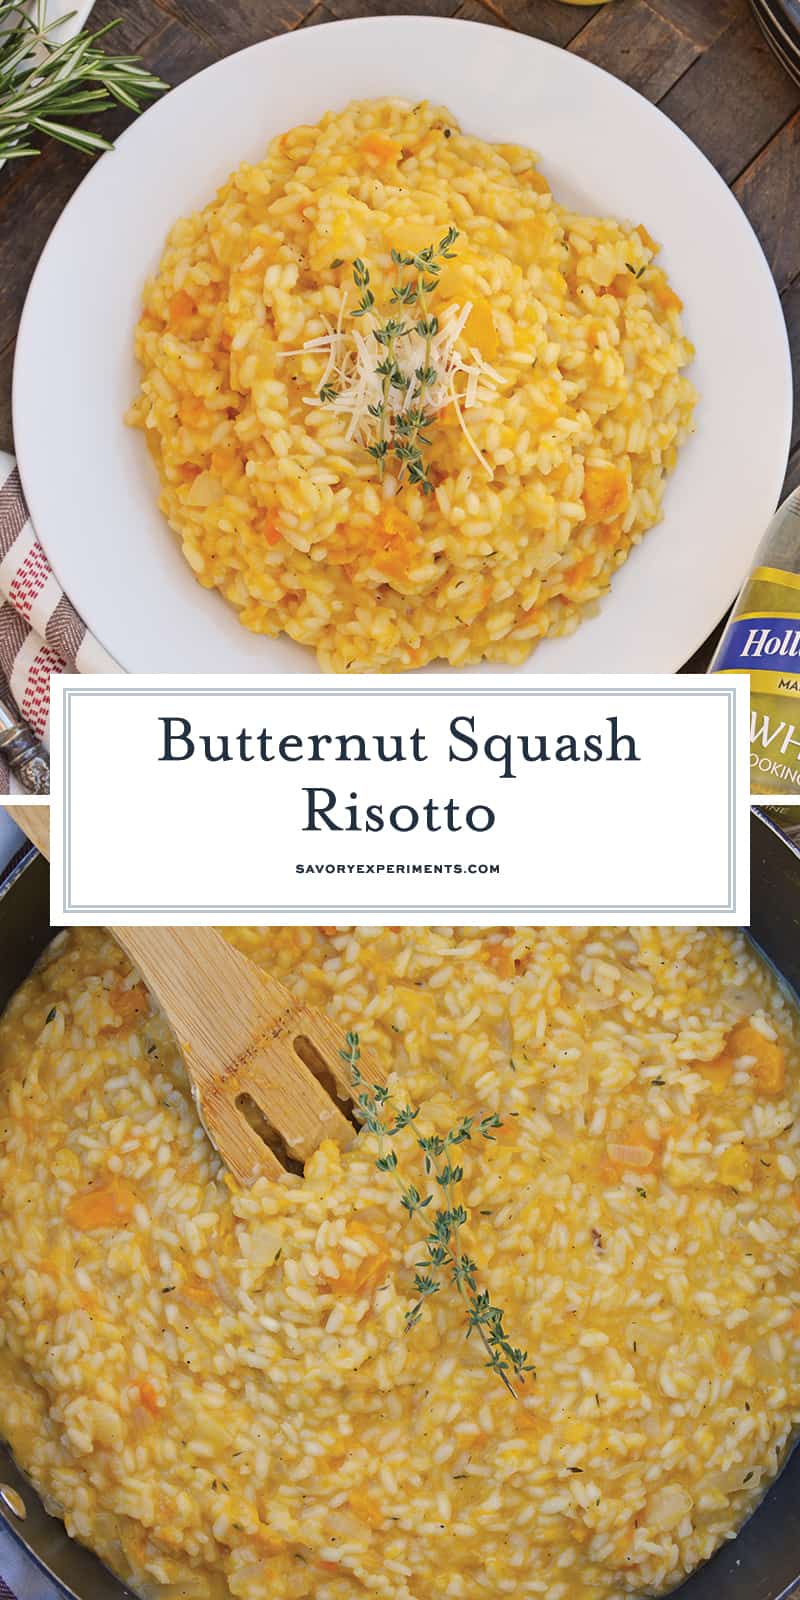 Butternut Squash Risotto is an easy side dish or entrée made with Arborio rice, crisp white cooking wine, sweet roasted butternut squash and fresh thyme. #risottorecipes #butternutsquash www.savoryexperiments.com 